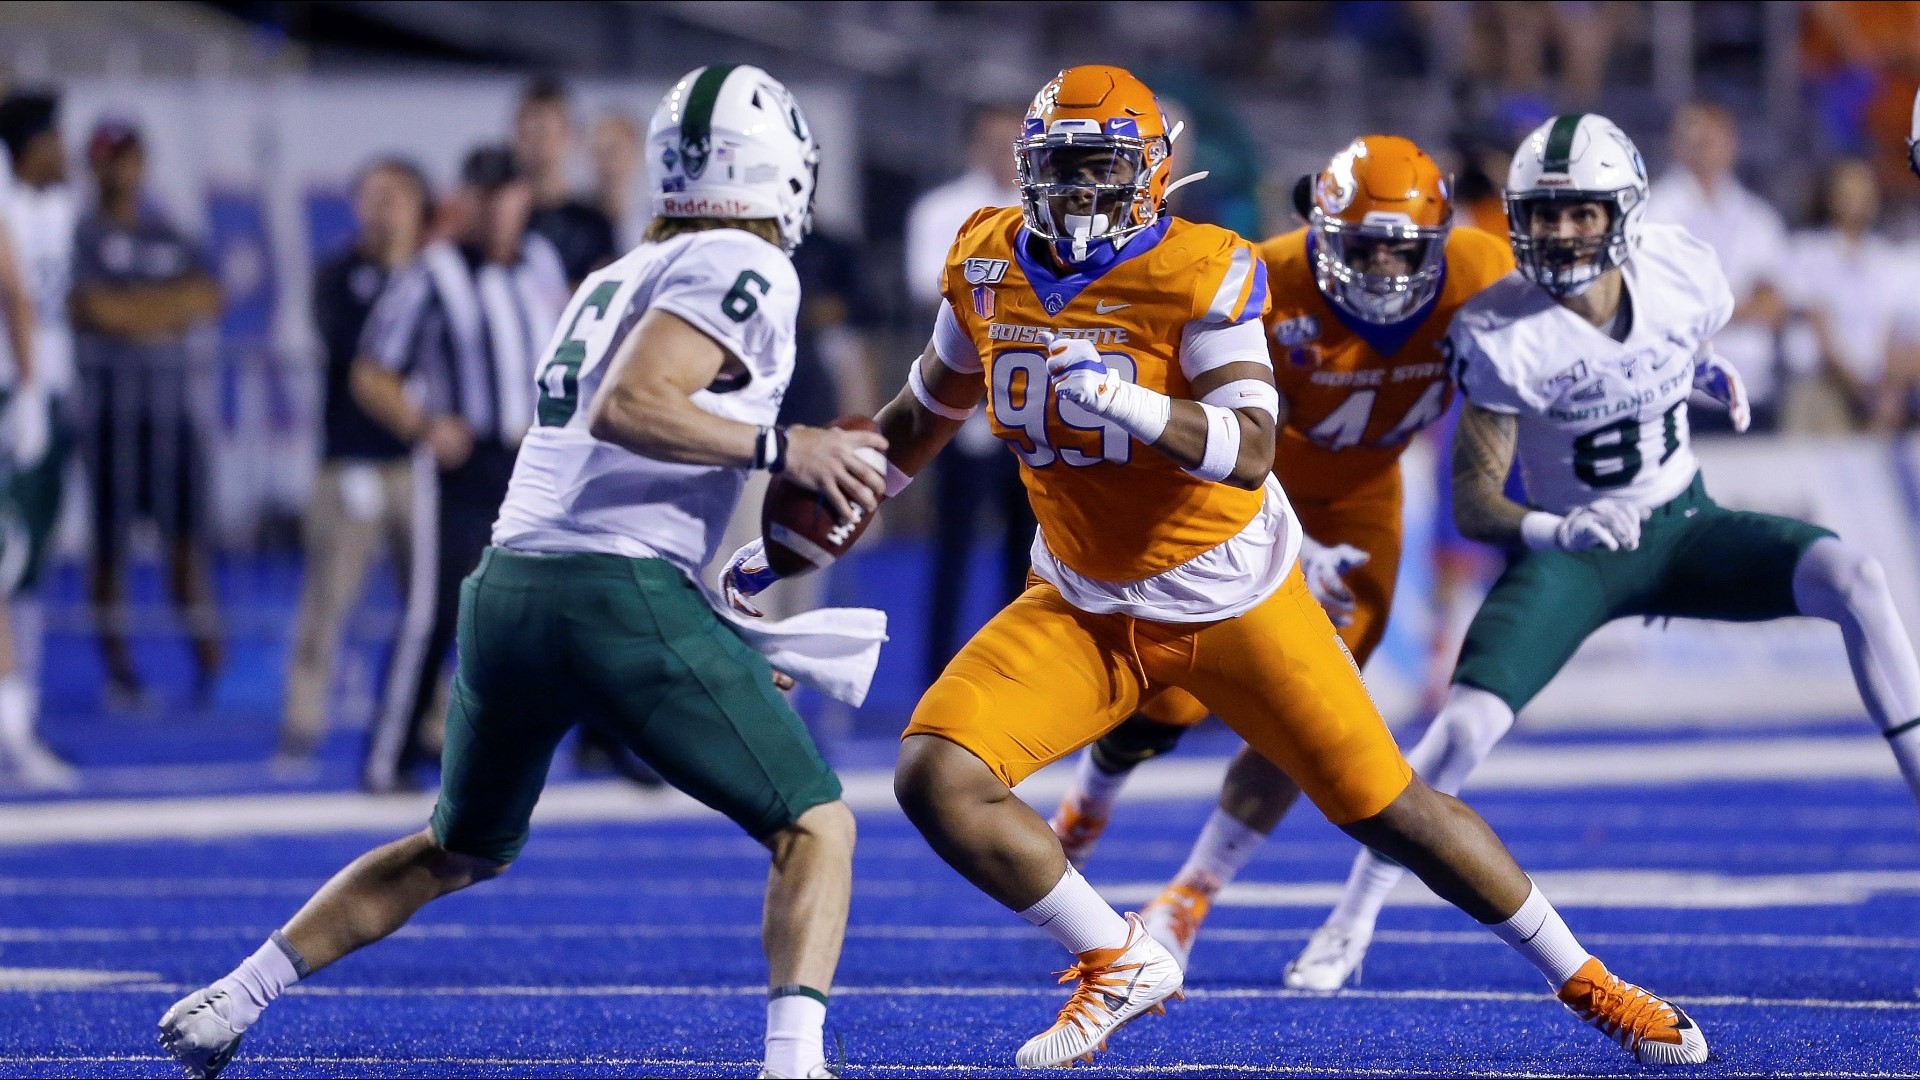 The Mountain West Conference revealed its annual postseason awards on Wednesday, and the Boise State football team cleaned up.